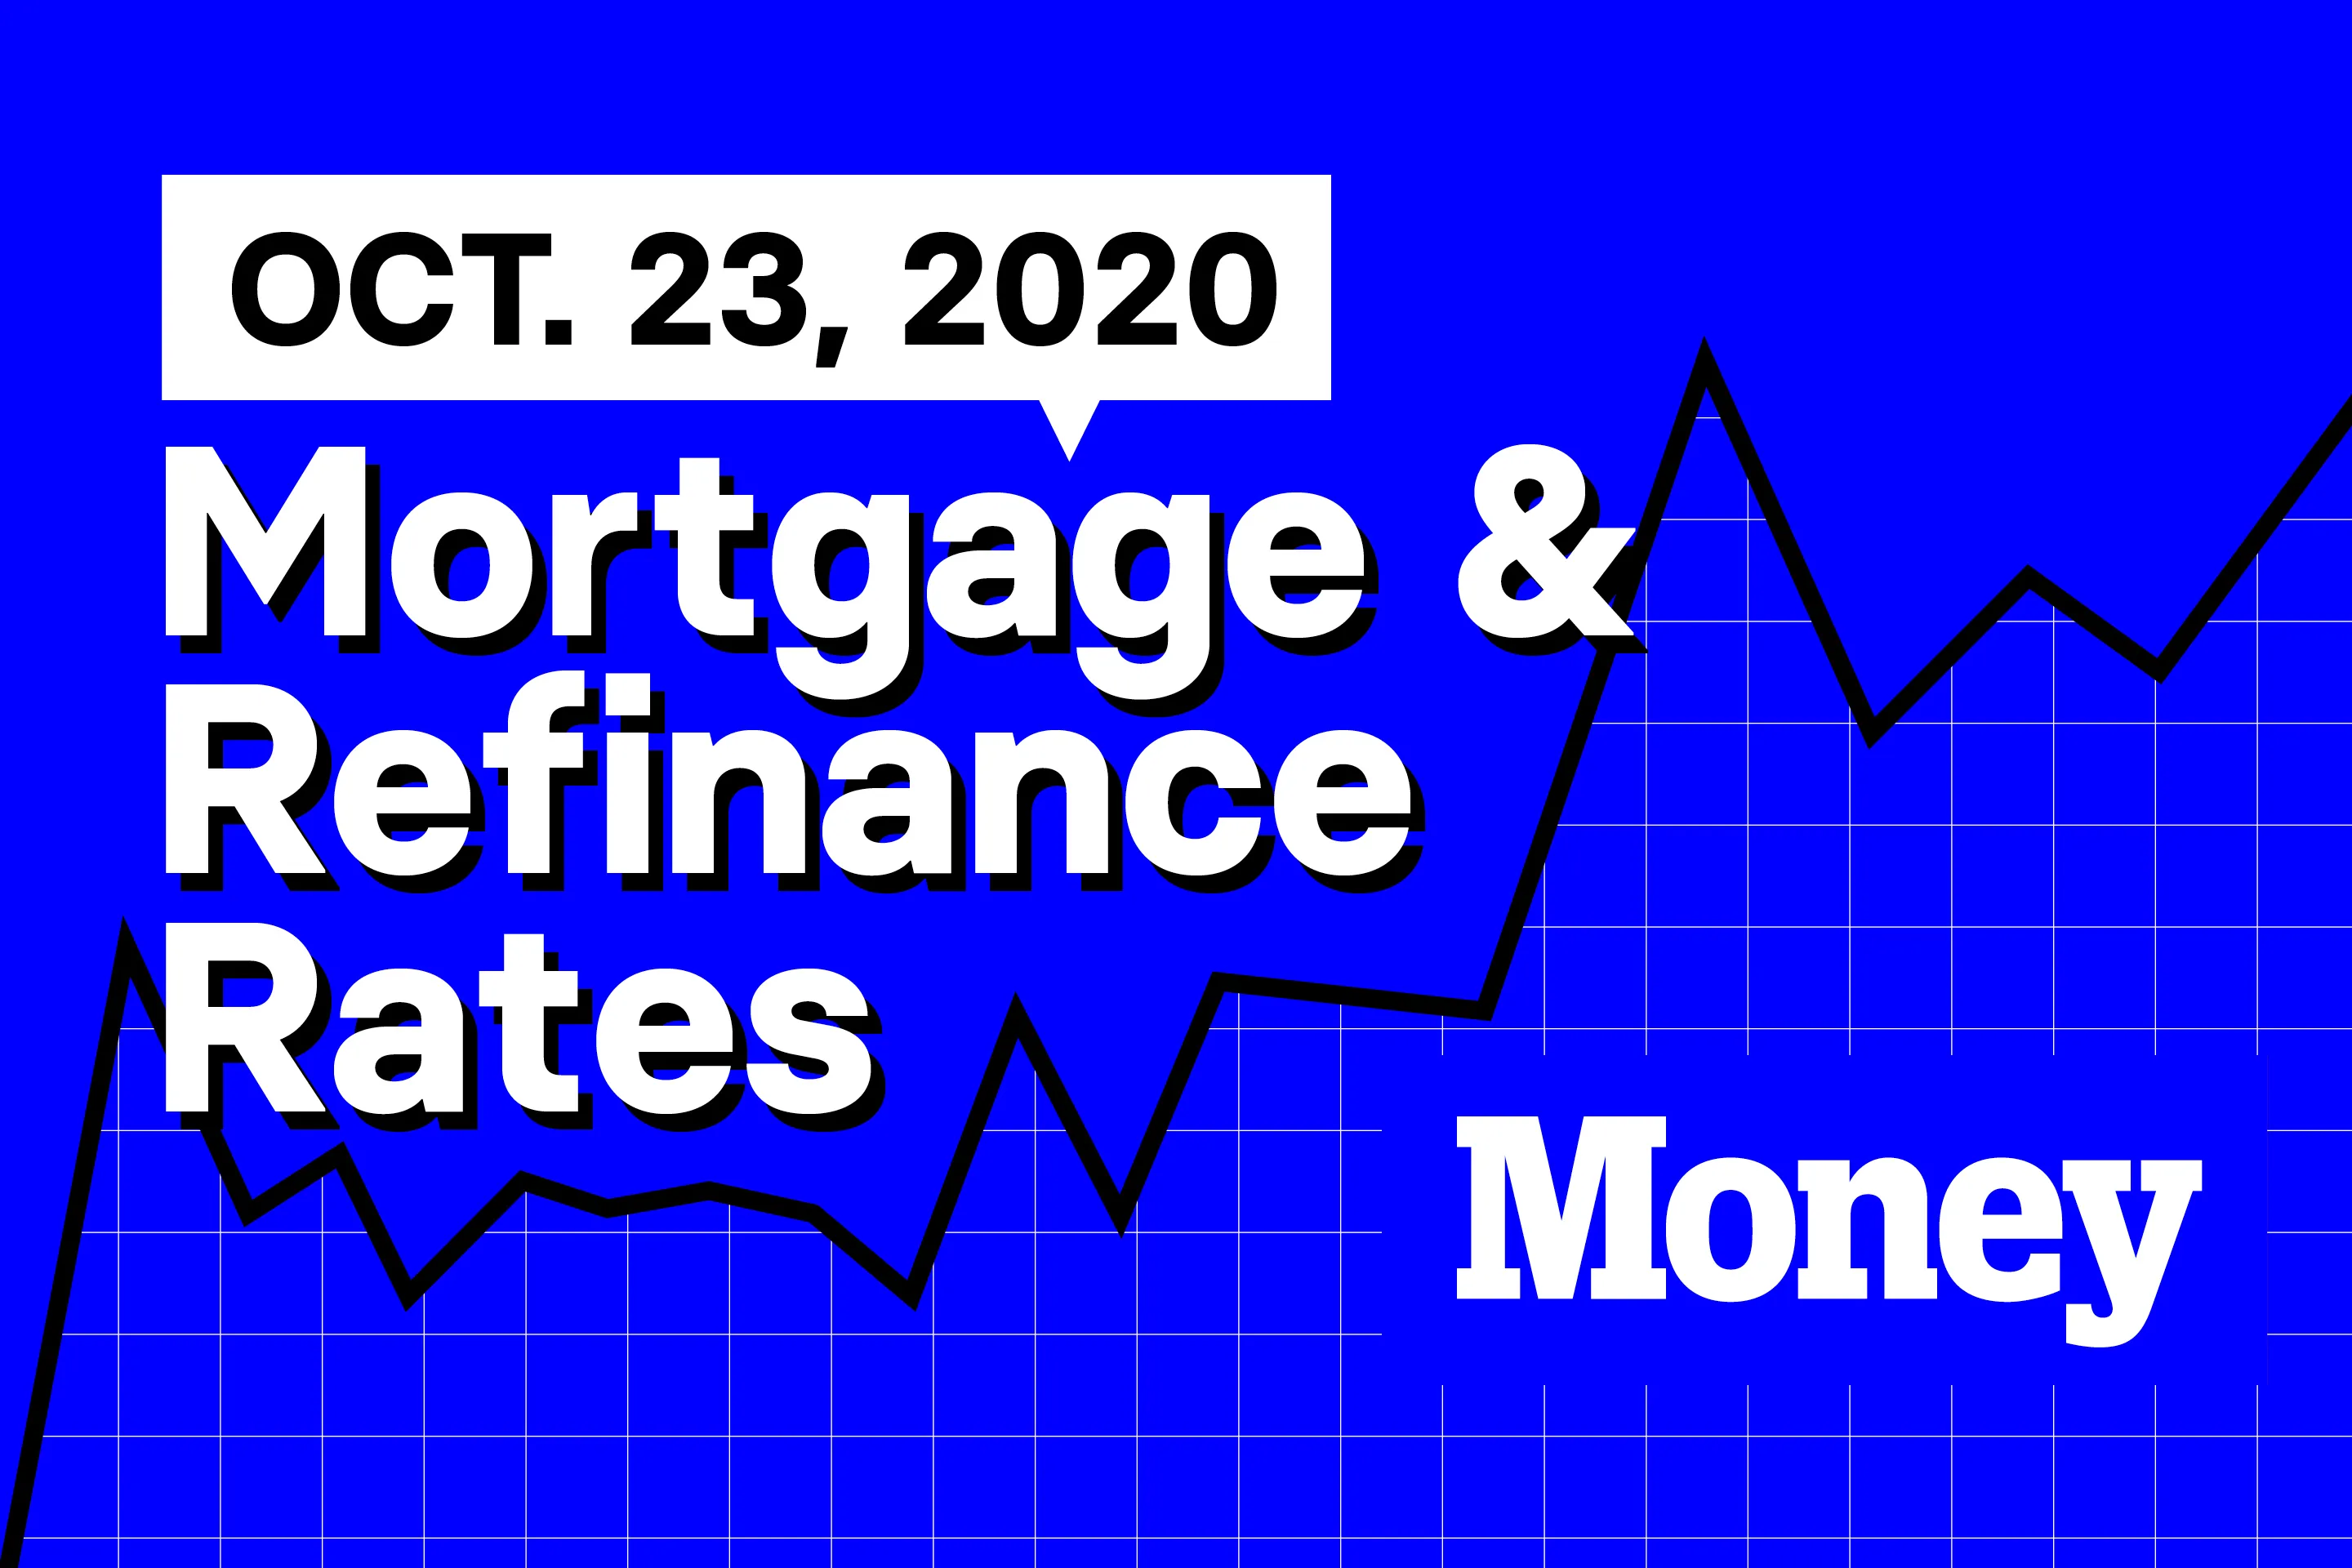 Here Are Today's Best Mortgage & Refinance Rates for October 23, 2020